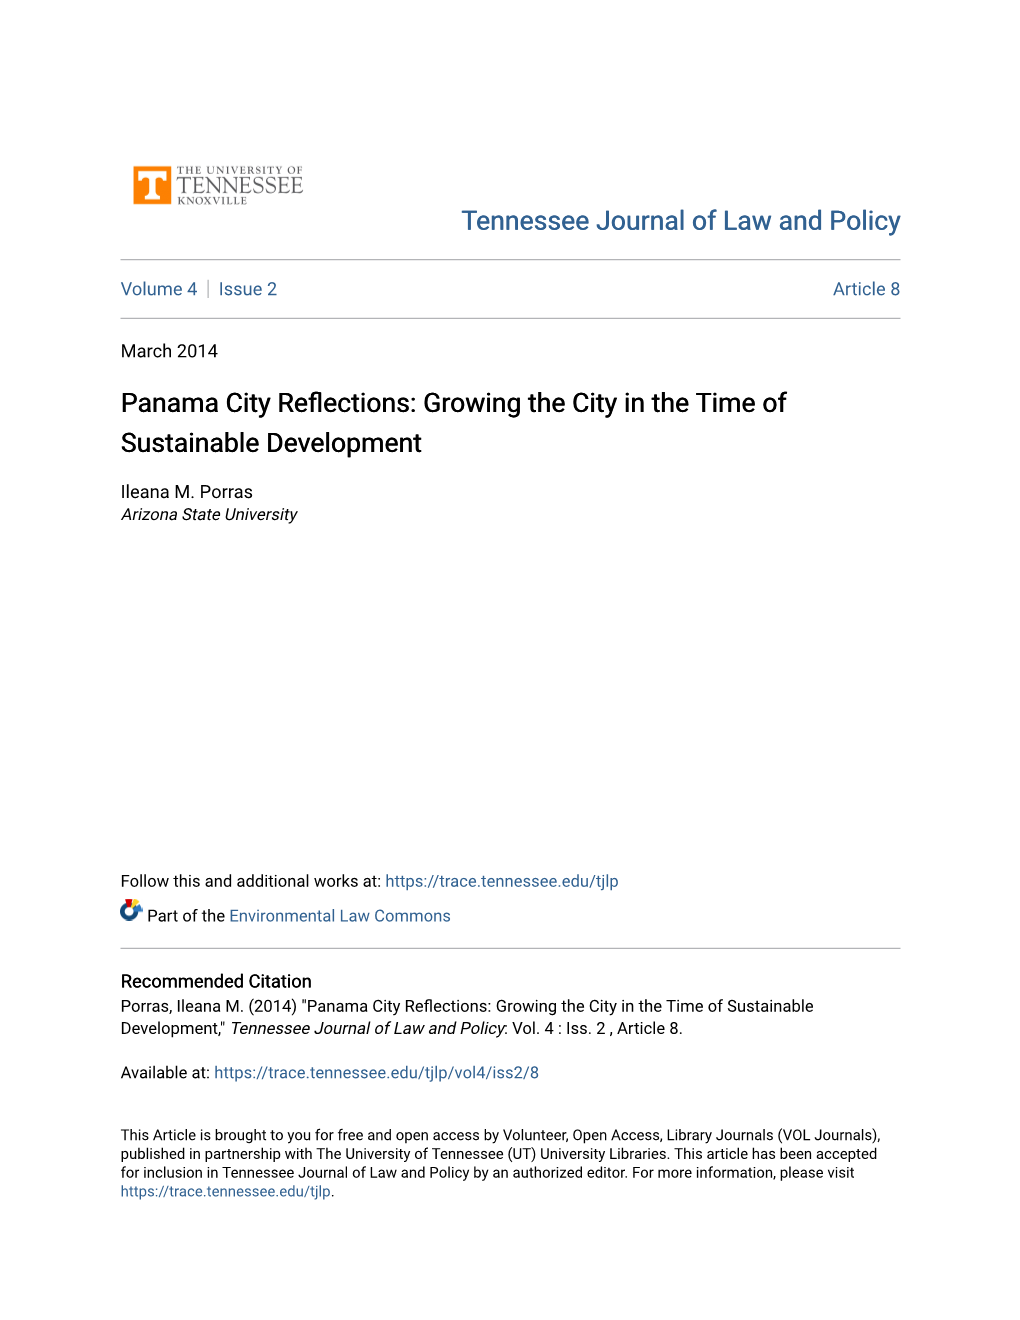 Panama City Reflections: Growing the City in the Time of Sustainable Development